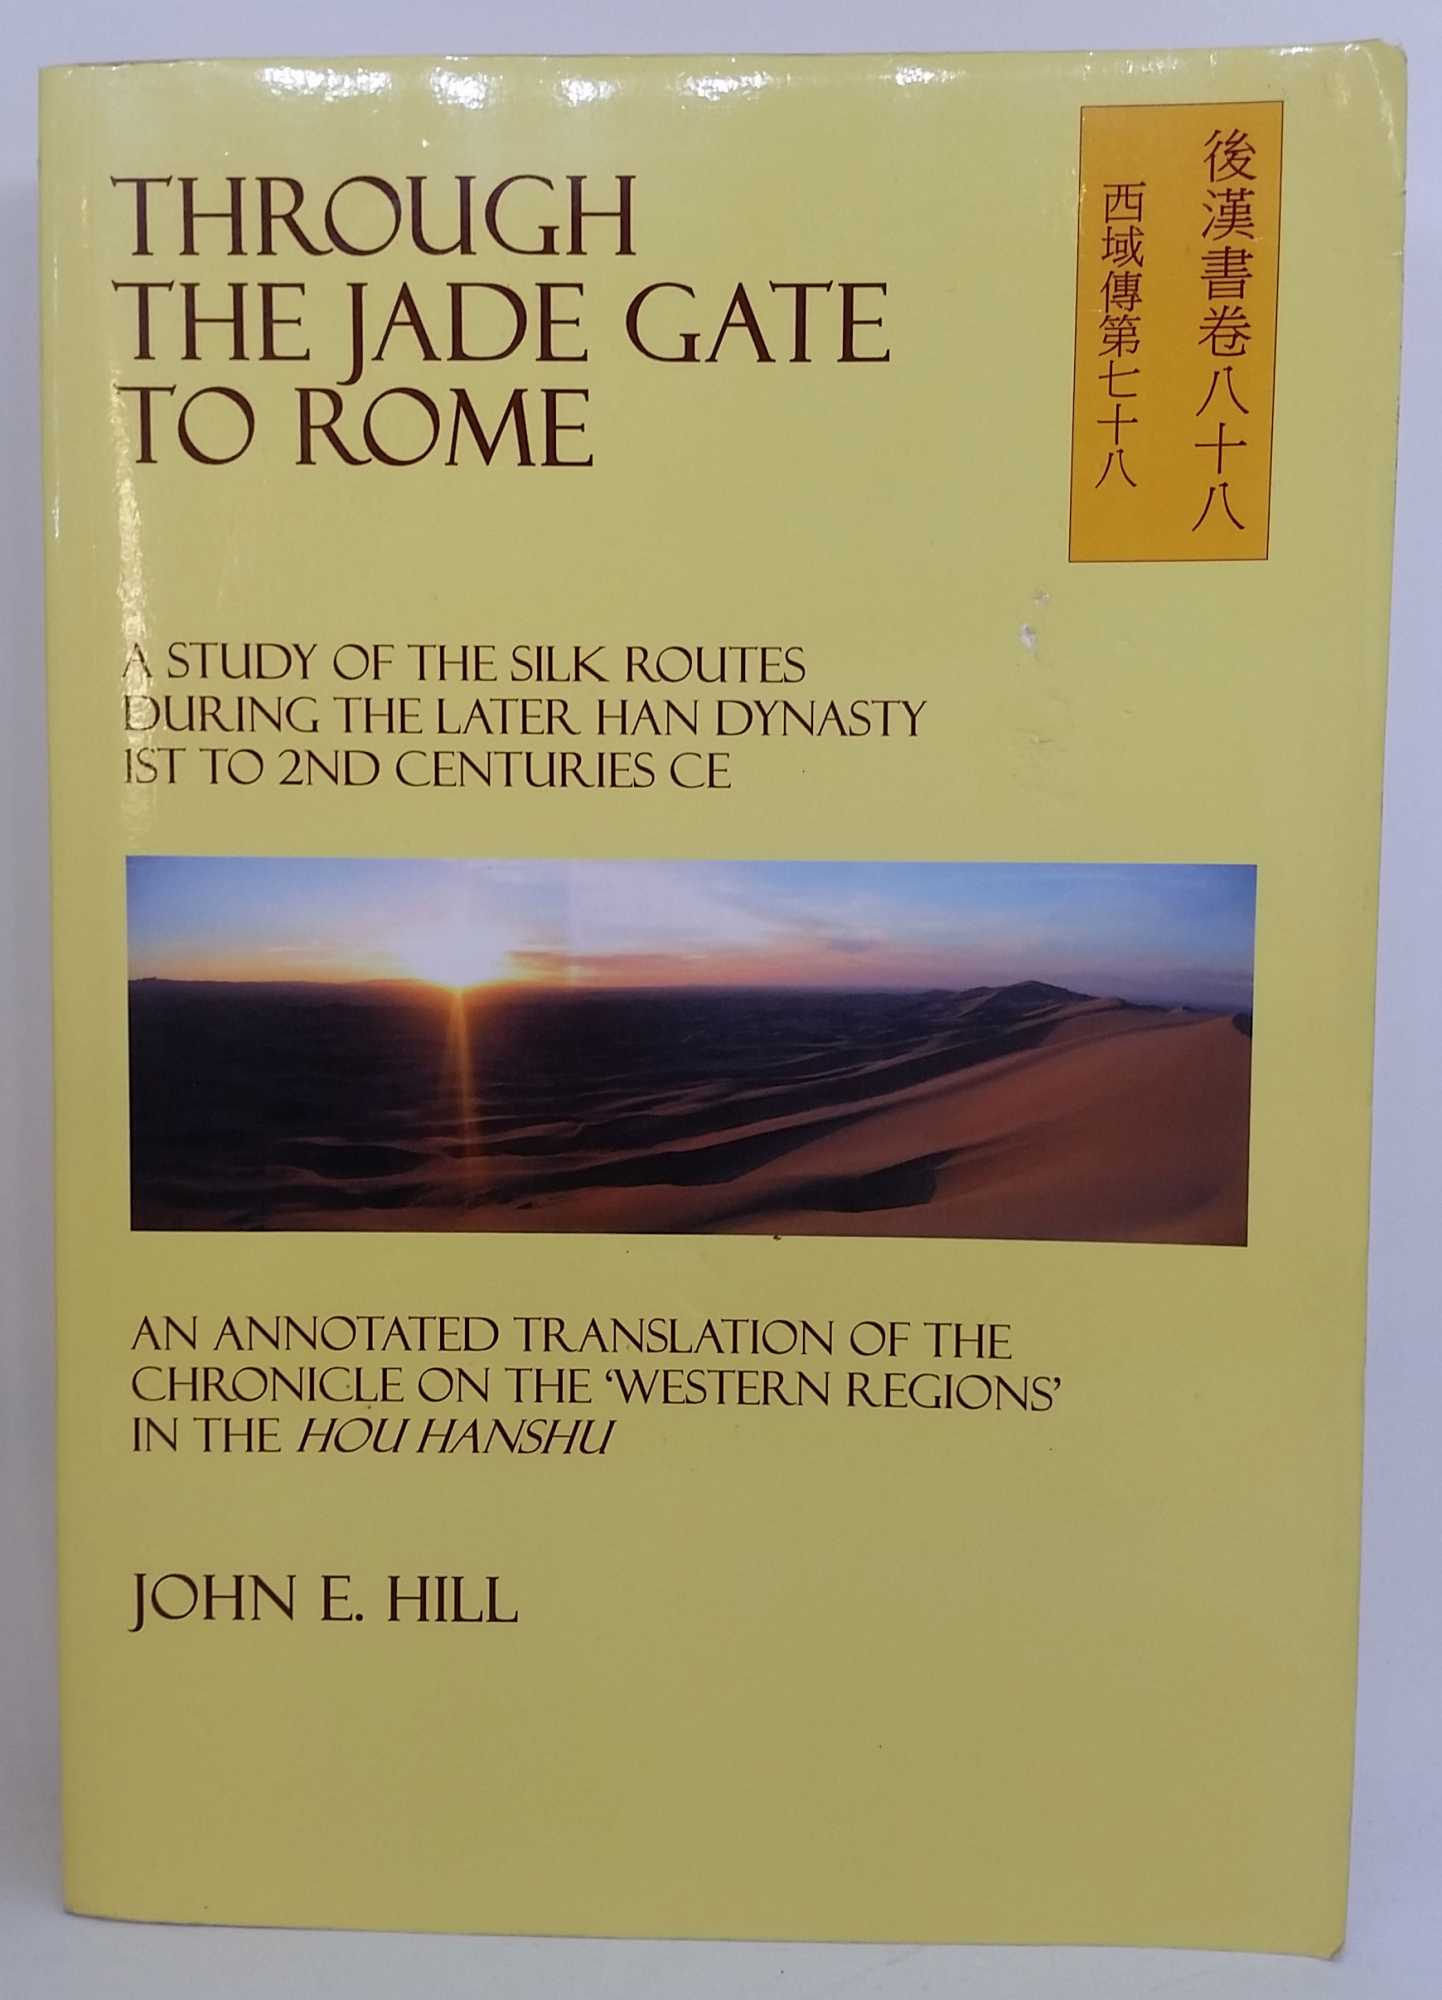 John E. Hill - Through the Jade Gate to Rome: A Study of the Silk Routes during the later Han Dynasty, 1st to 2nd Centuries CE